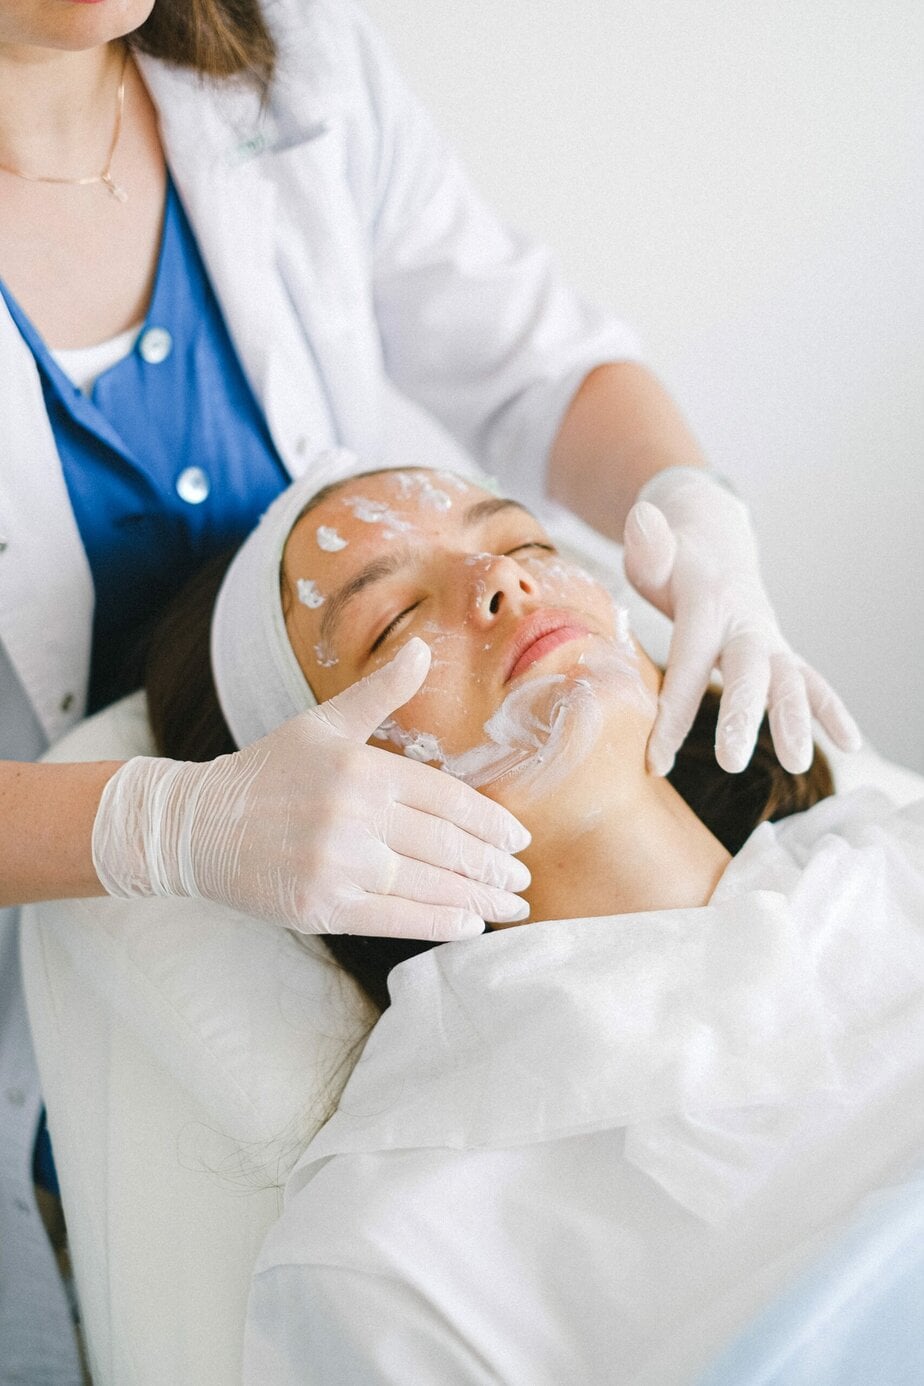 How Microdermabrasion Saved my Acne Prone Skin